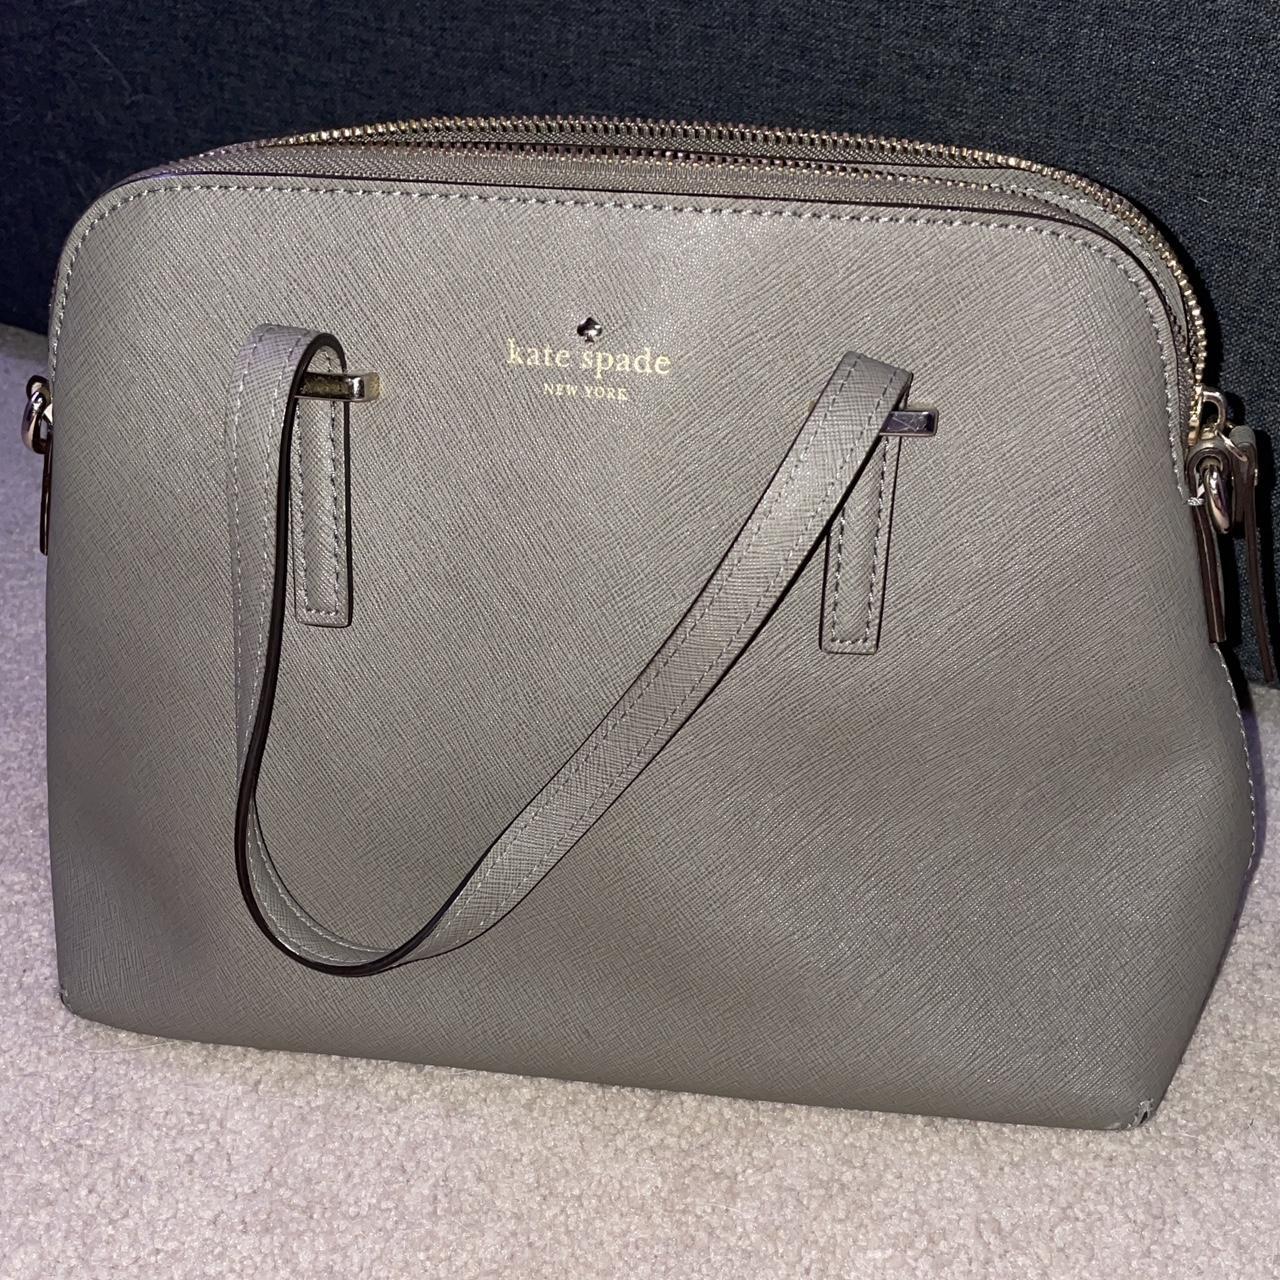 Kate Spade New York  Women's Grey and Silver Bag